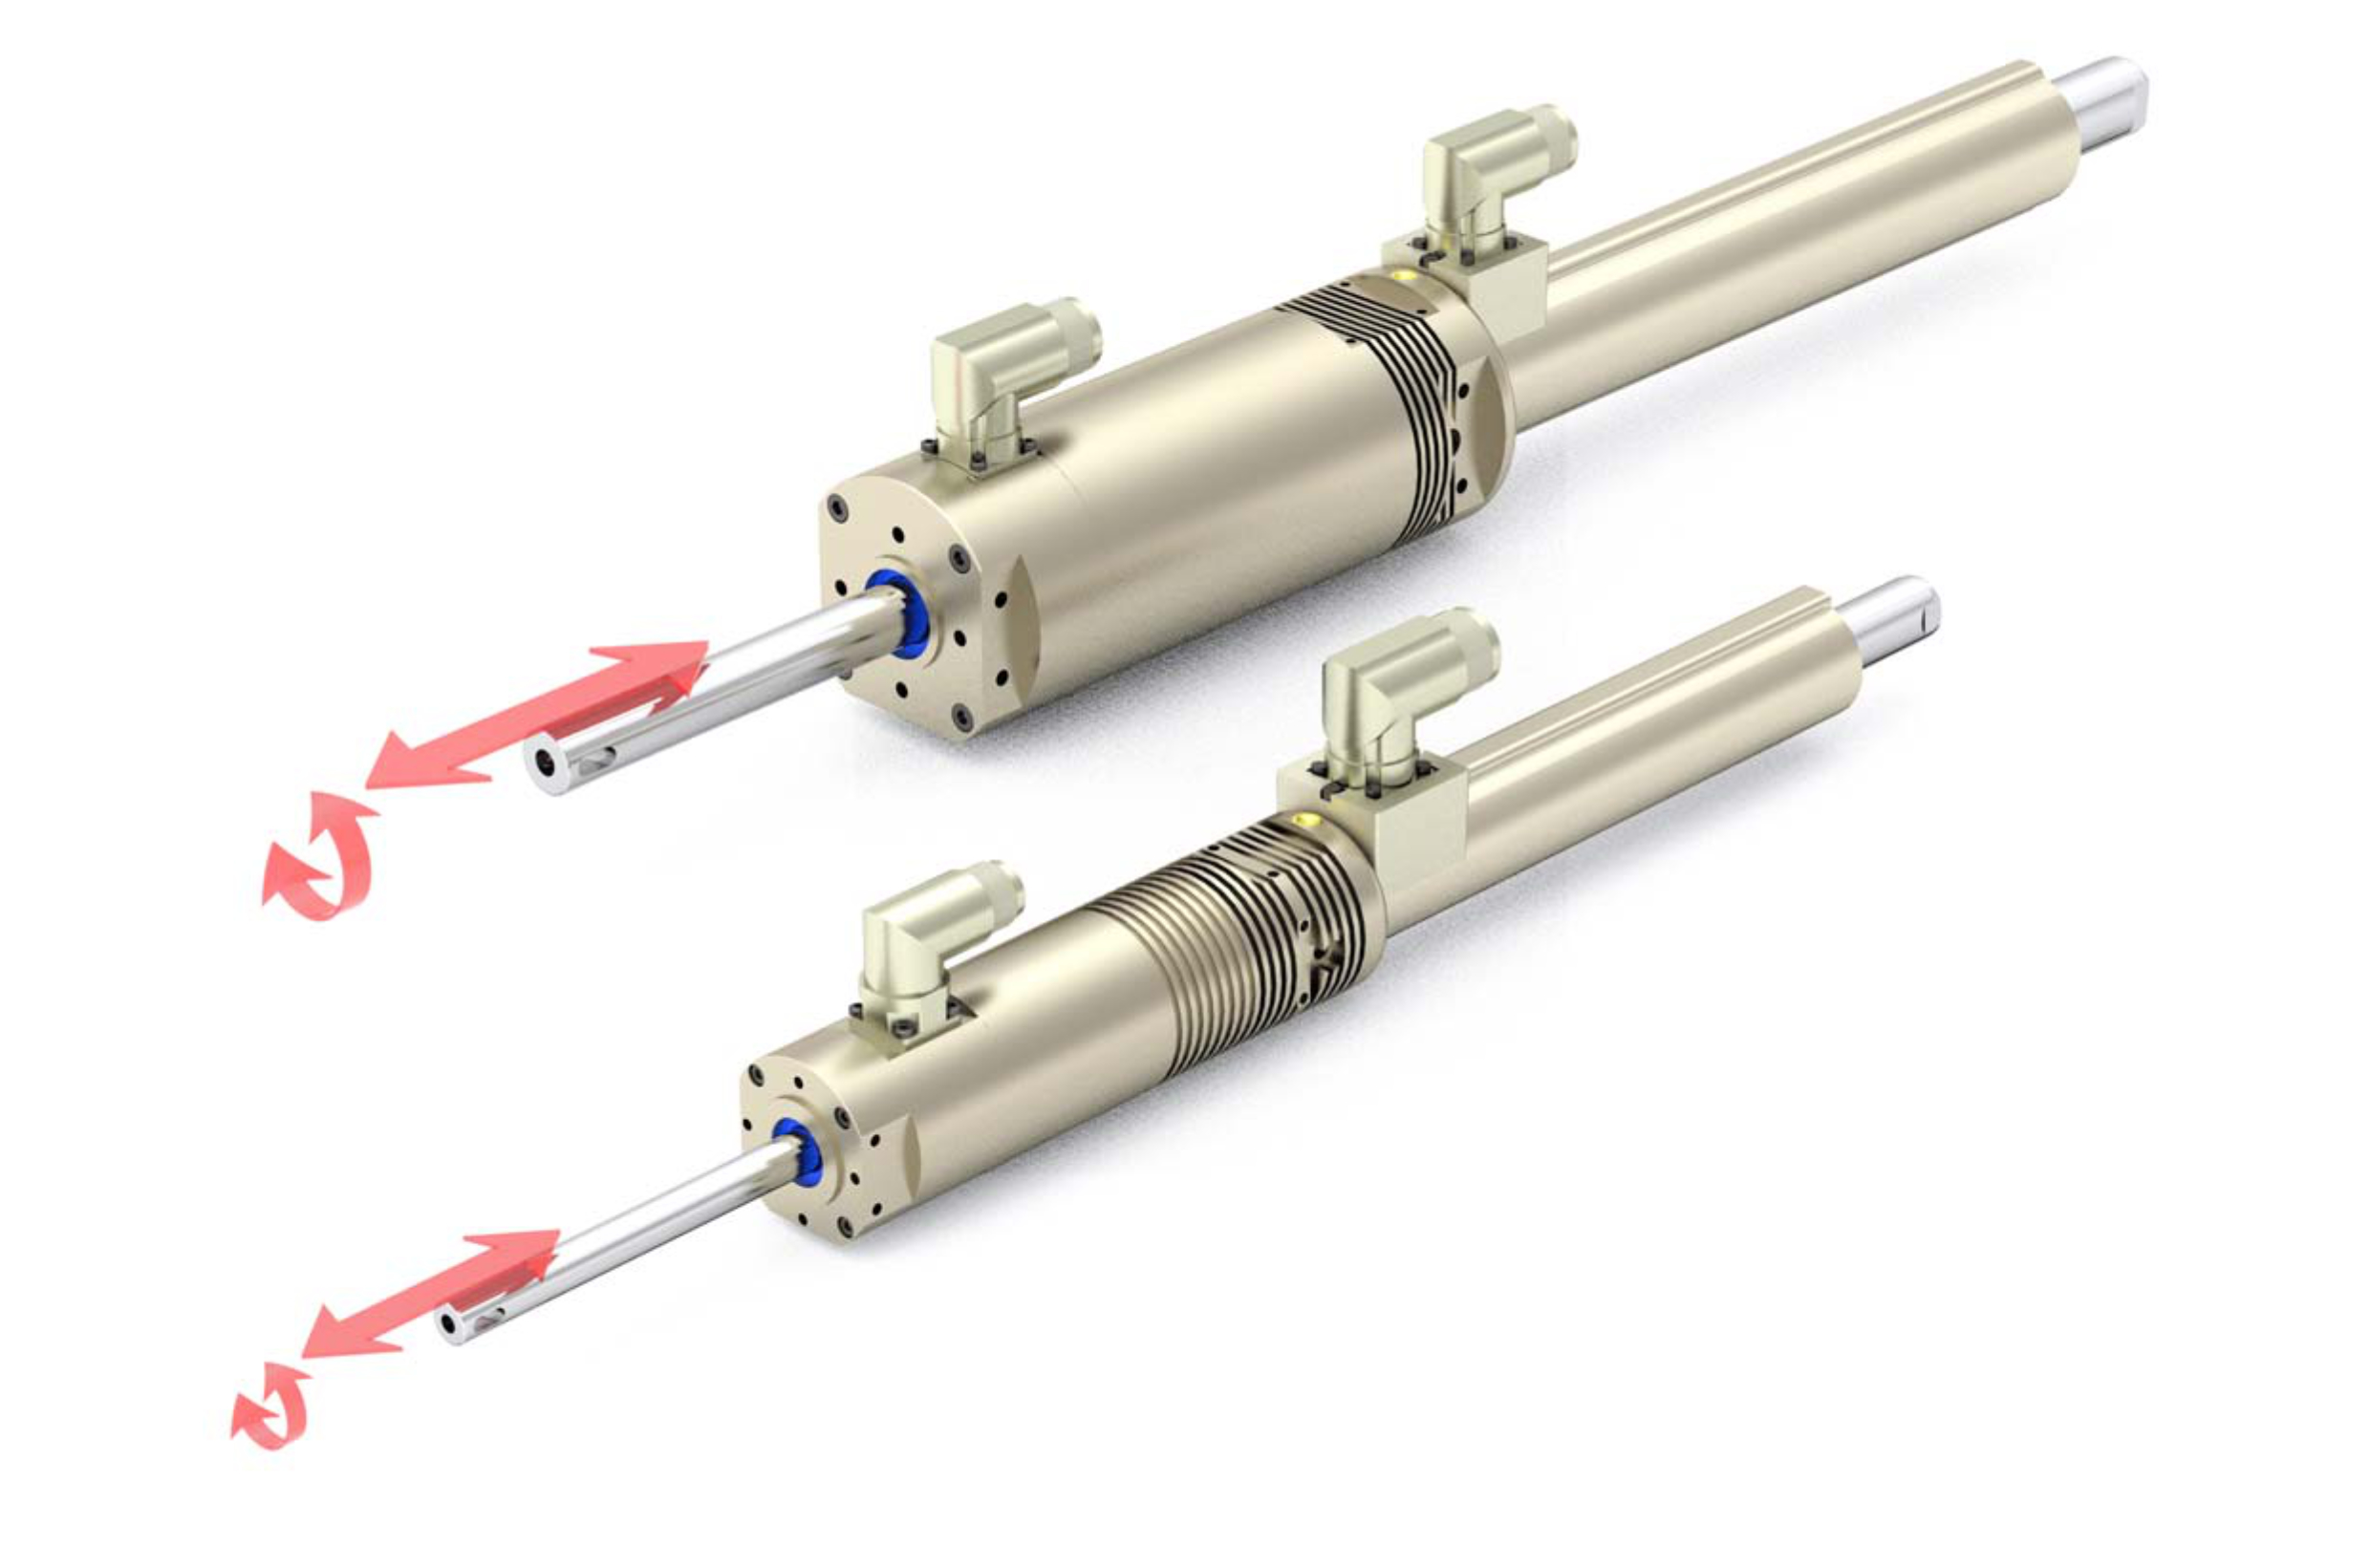 LinMot - Linear Rotary Actuator combining linear & rotary movements into one package. 